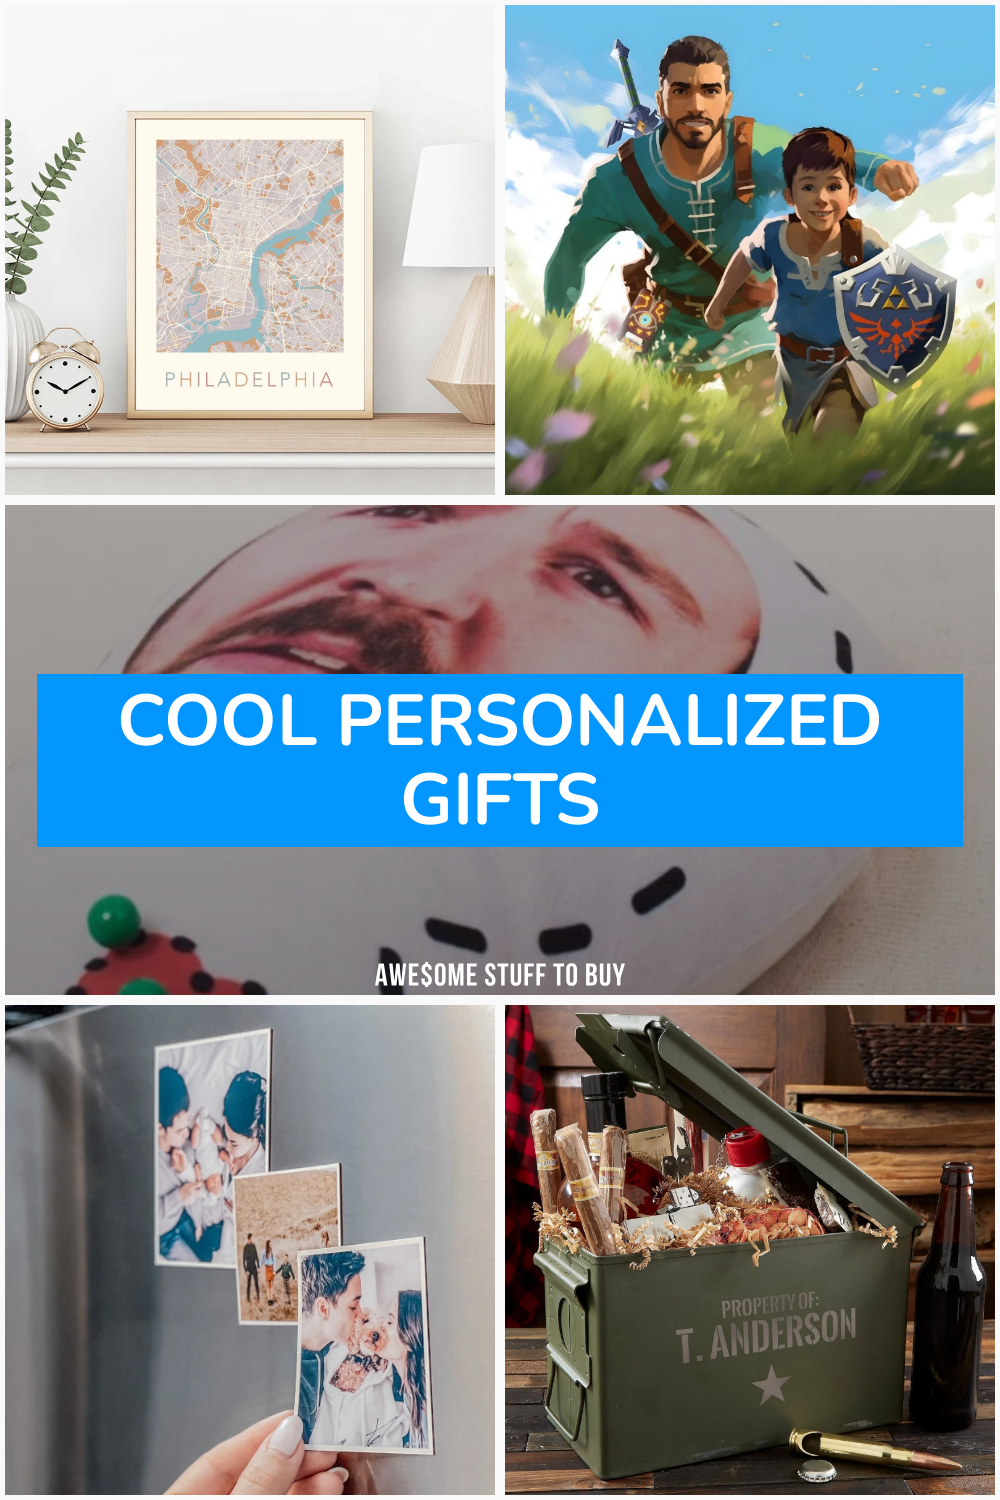 Cool Personalized Gifts // Awesome Stuff to Buy